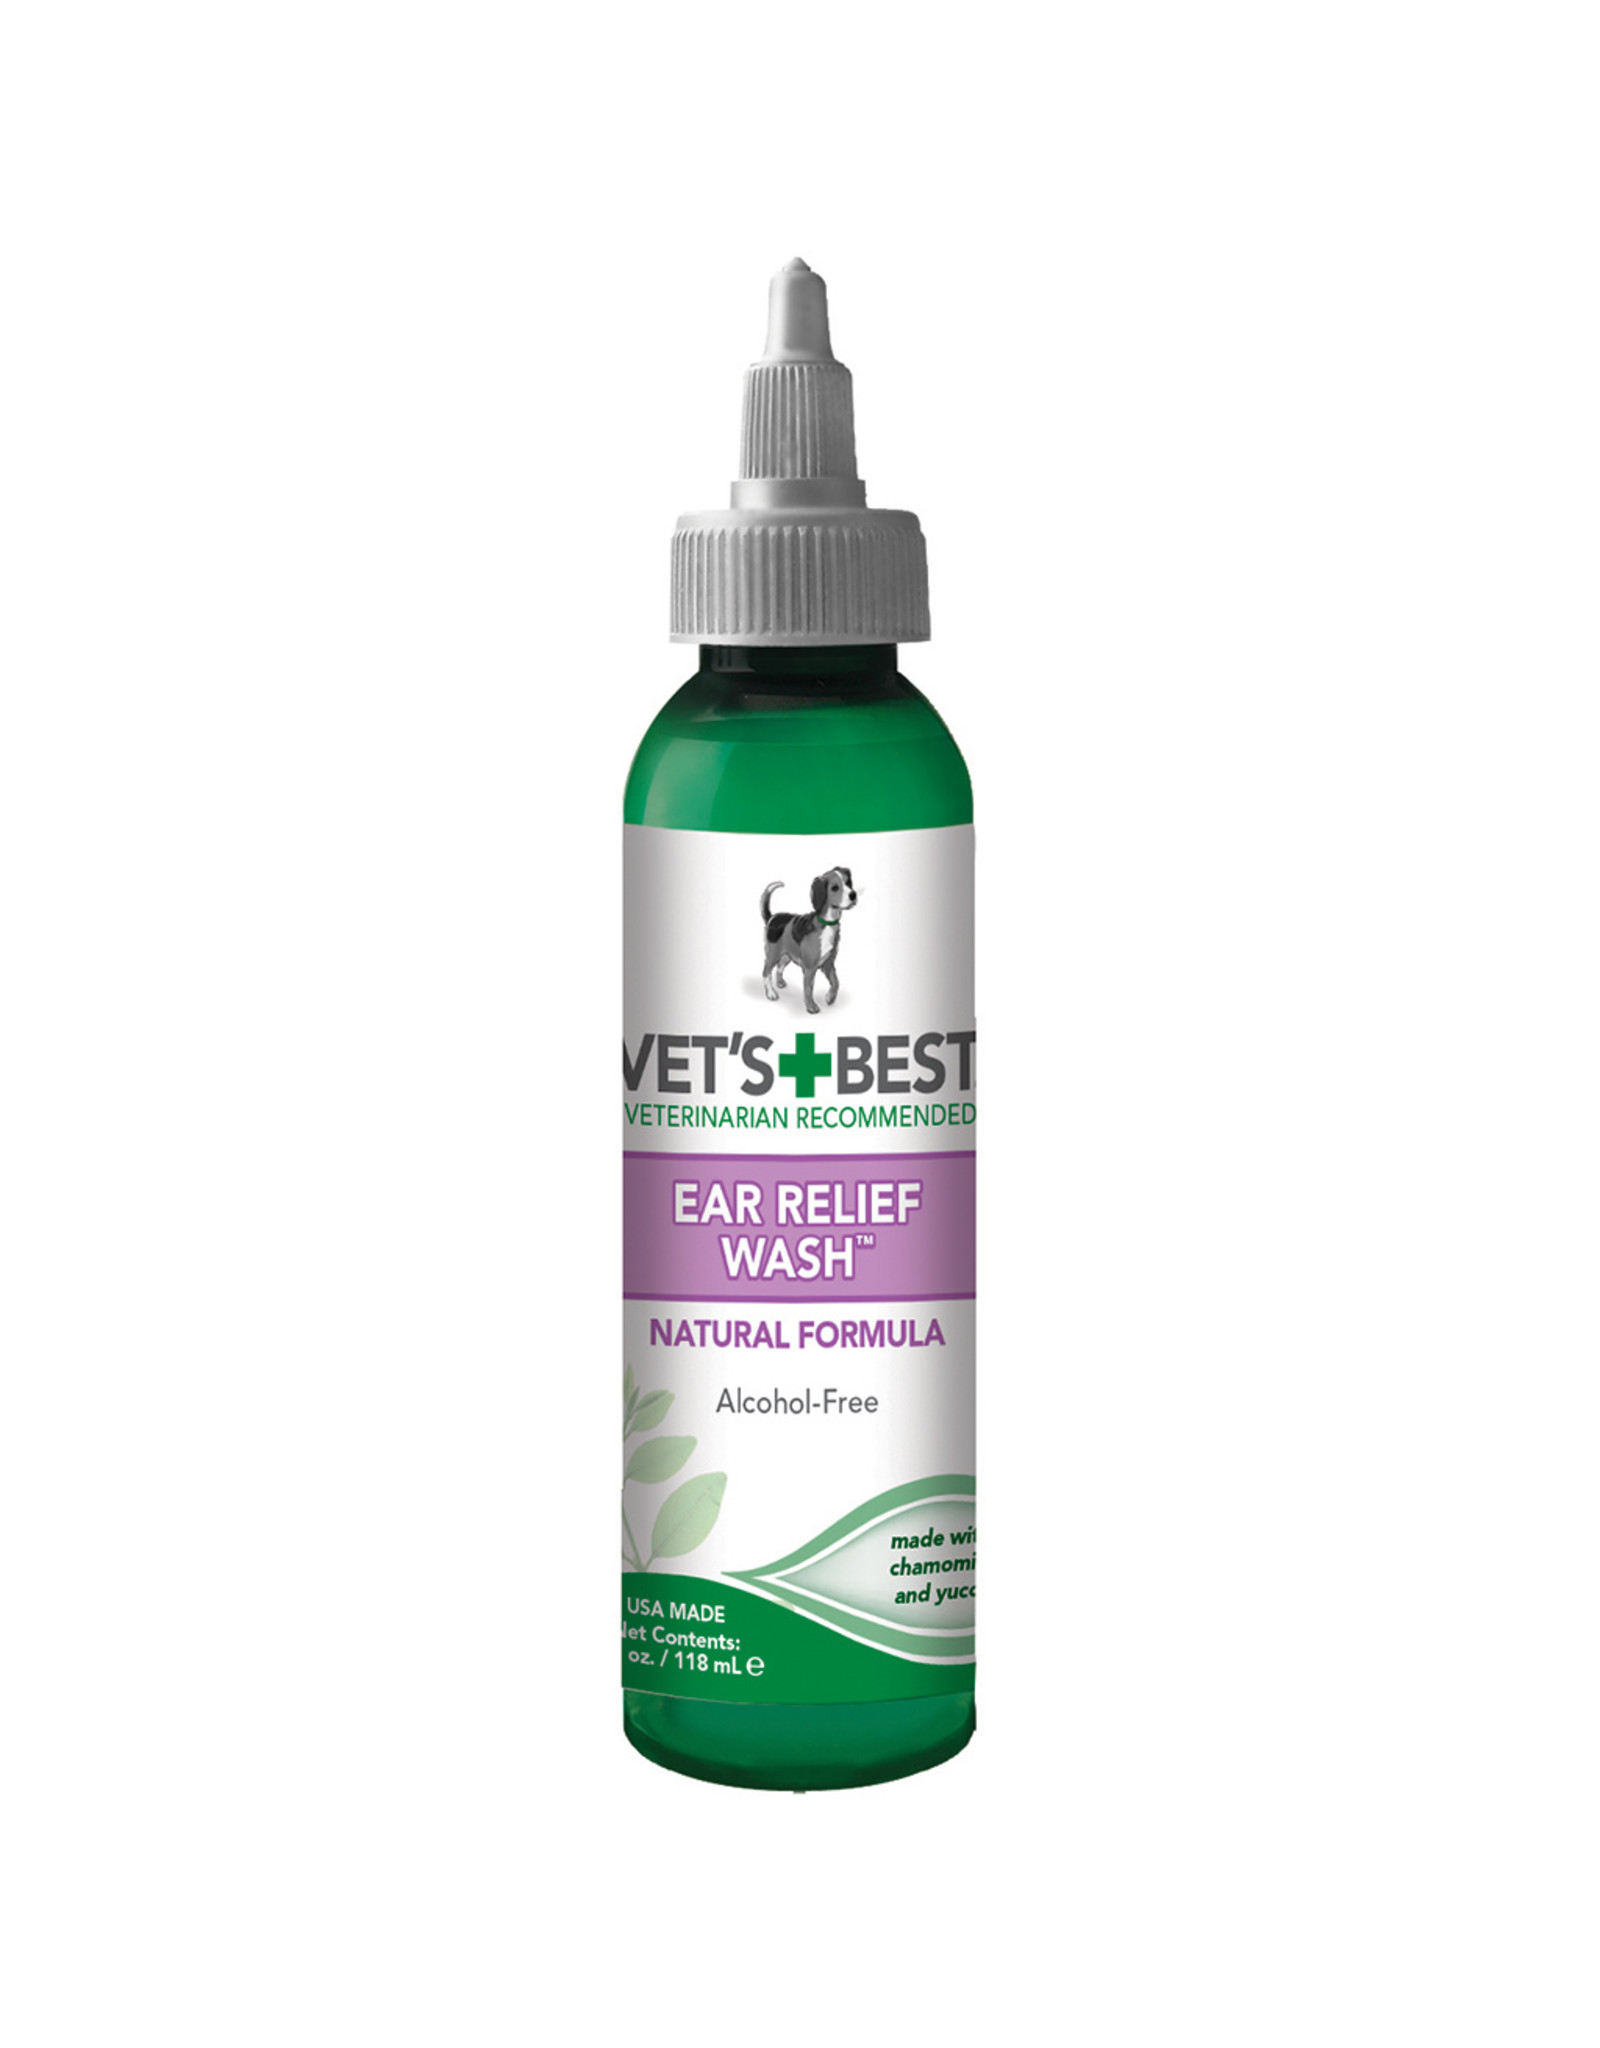 Vets Best Ear Wash Relief 4oz